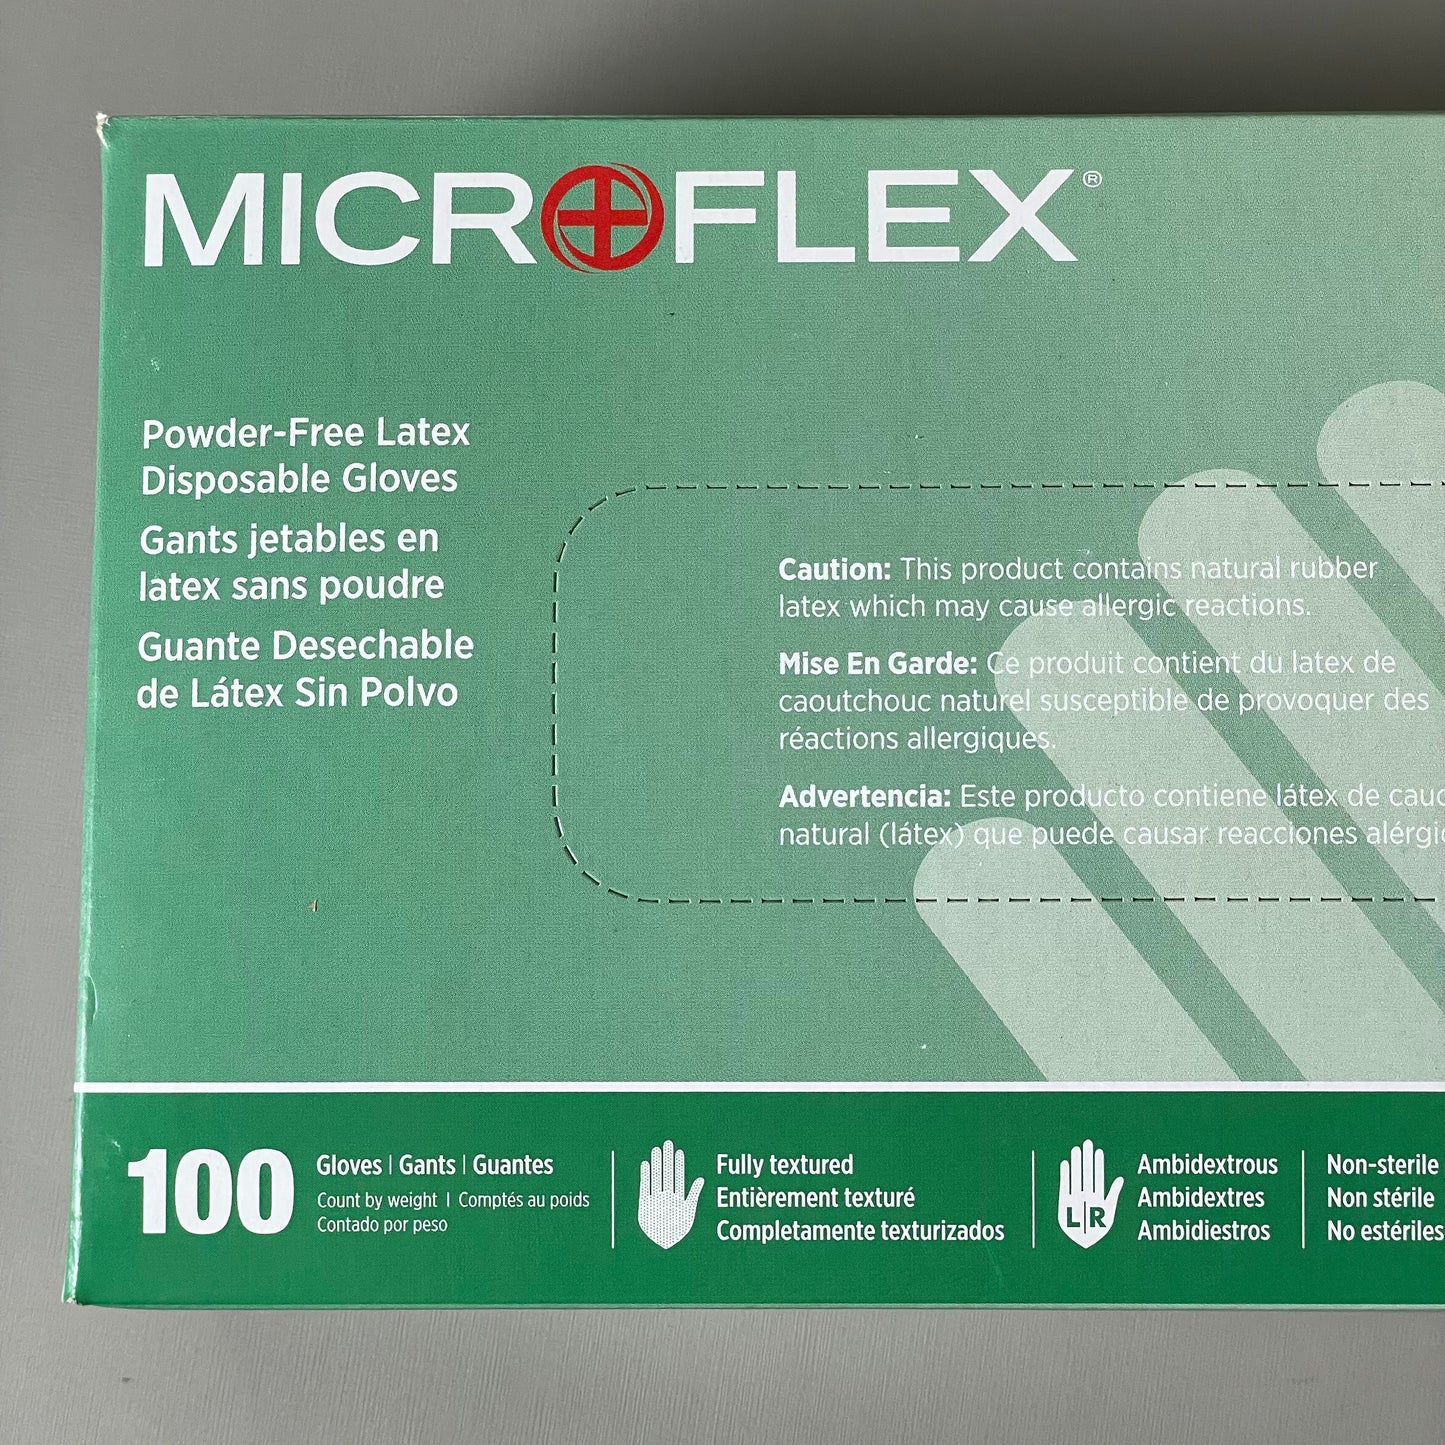 ANSELL MICROFLEX Case Of 10 Powder-Free Latex Disposable Gloves Sz M 100 Pc L562 (New)